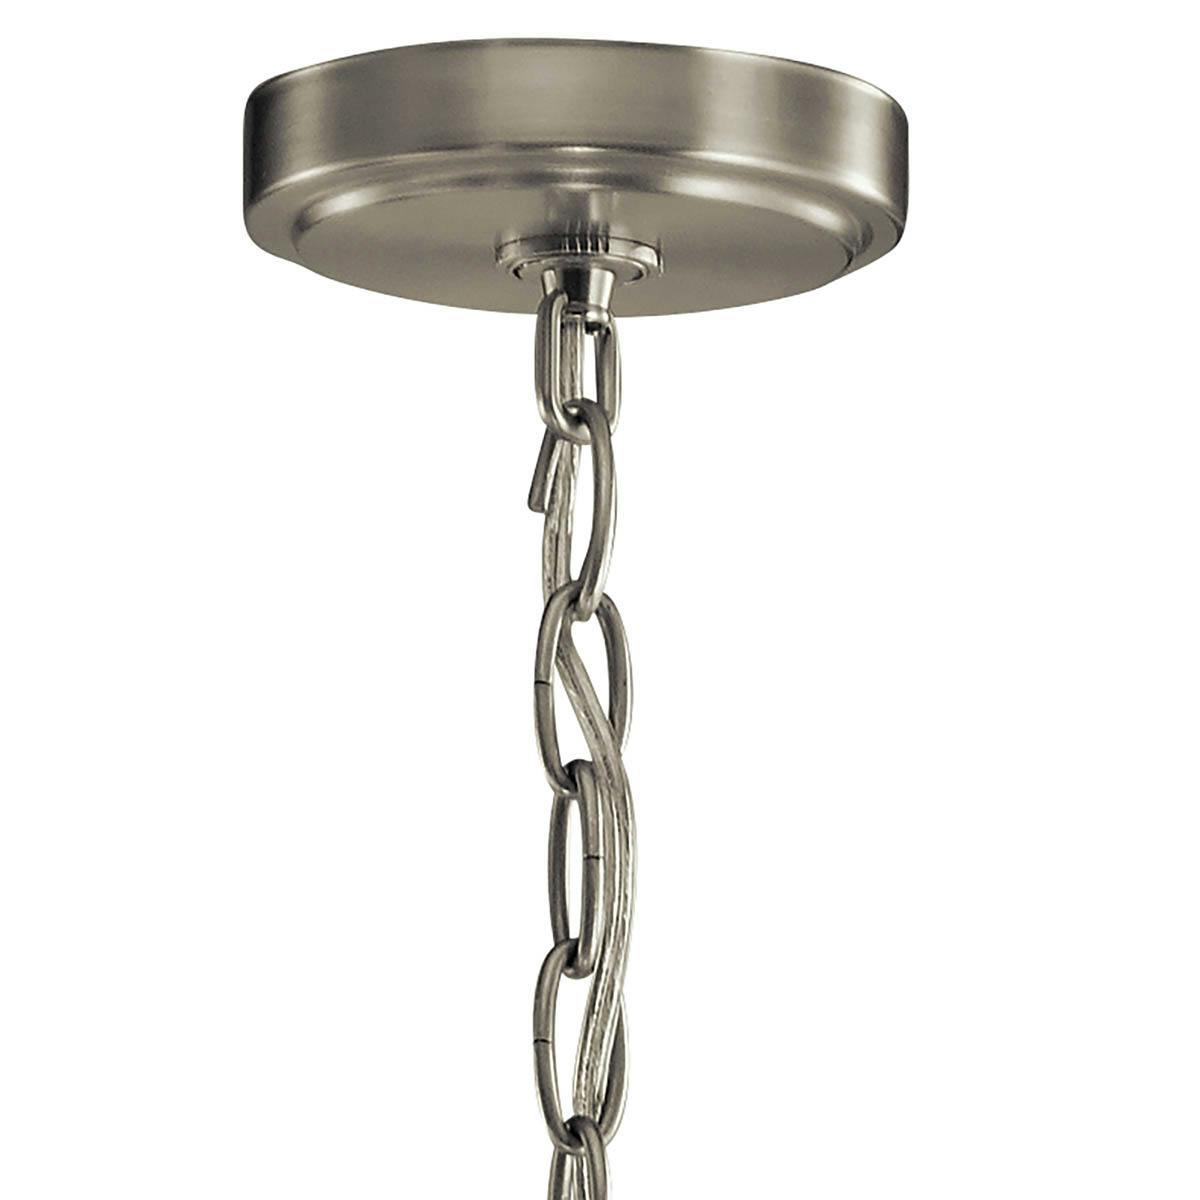 Canopy for the Voleta 26.25" Foyer Pendant Nickel on a white background